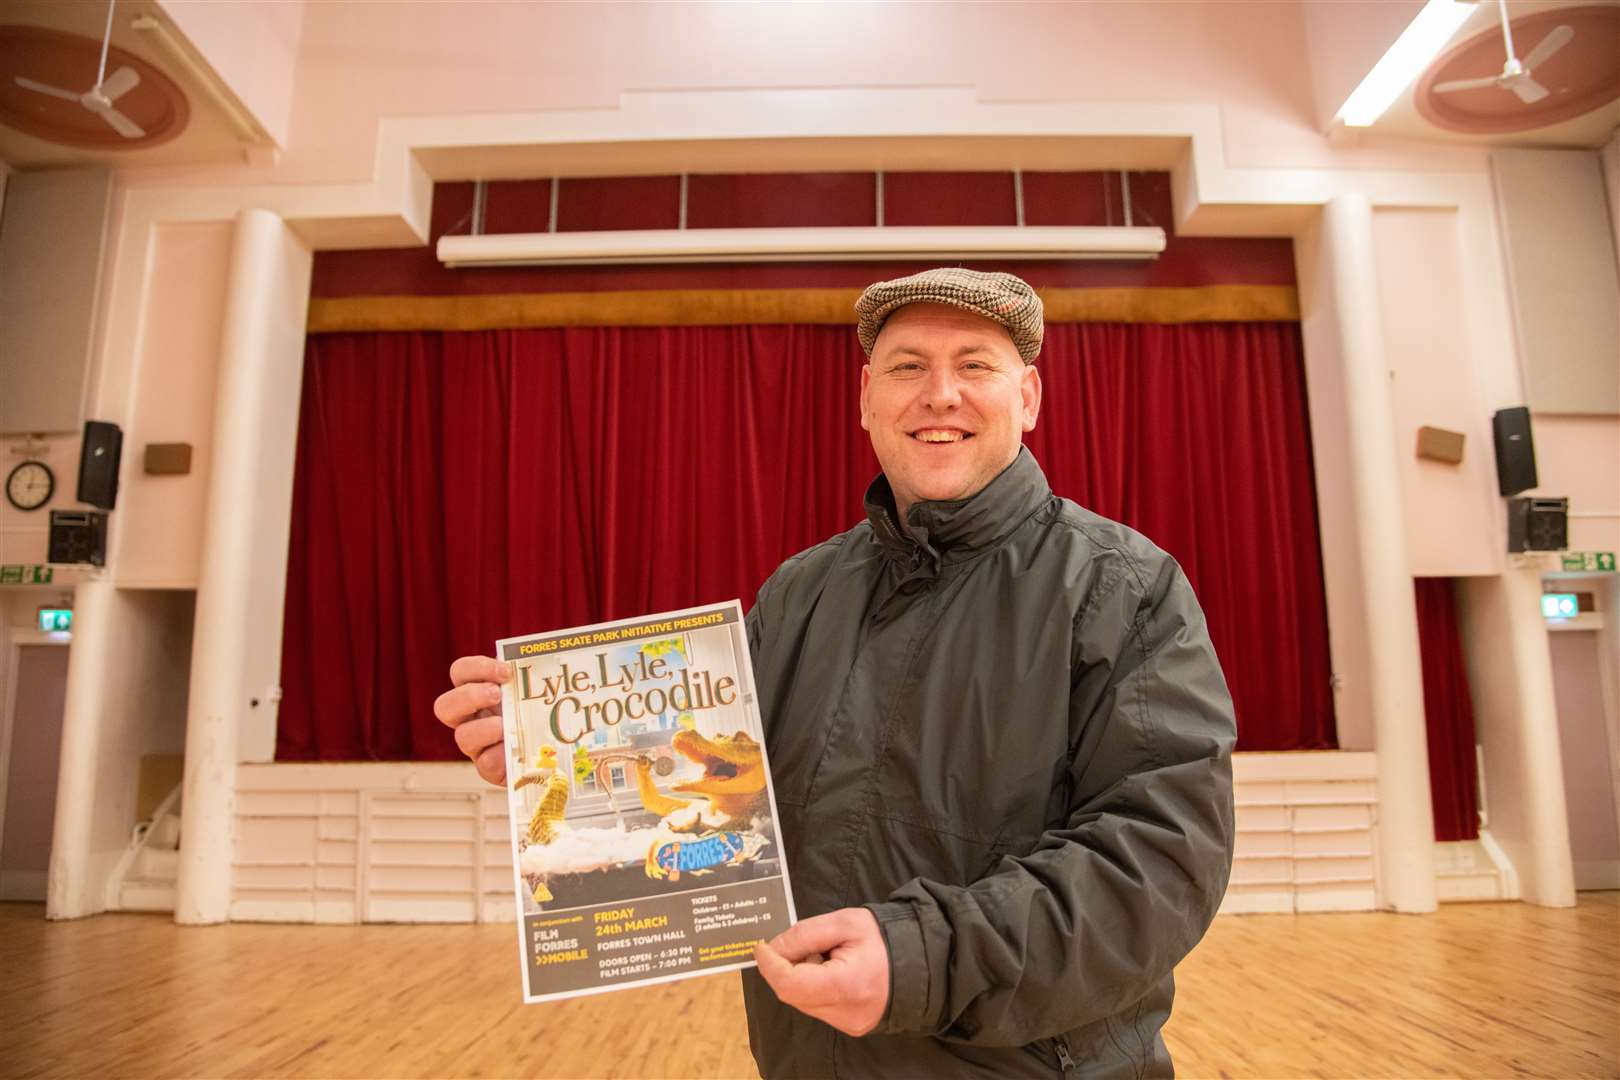 Shaun Moat hopes as many people as possible attend the film double bill at the town hall. Picture: Daniel Forsyth